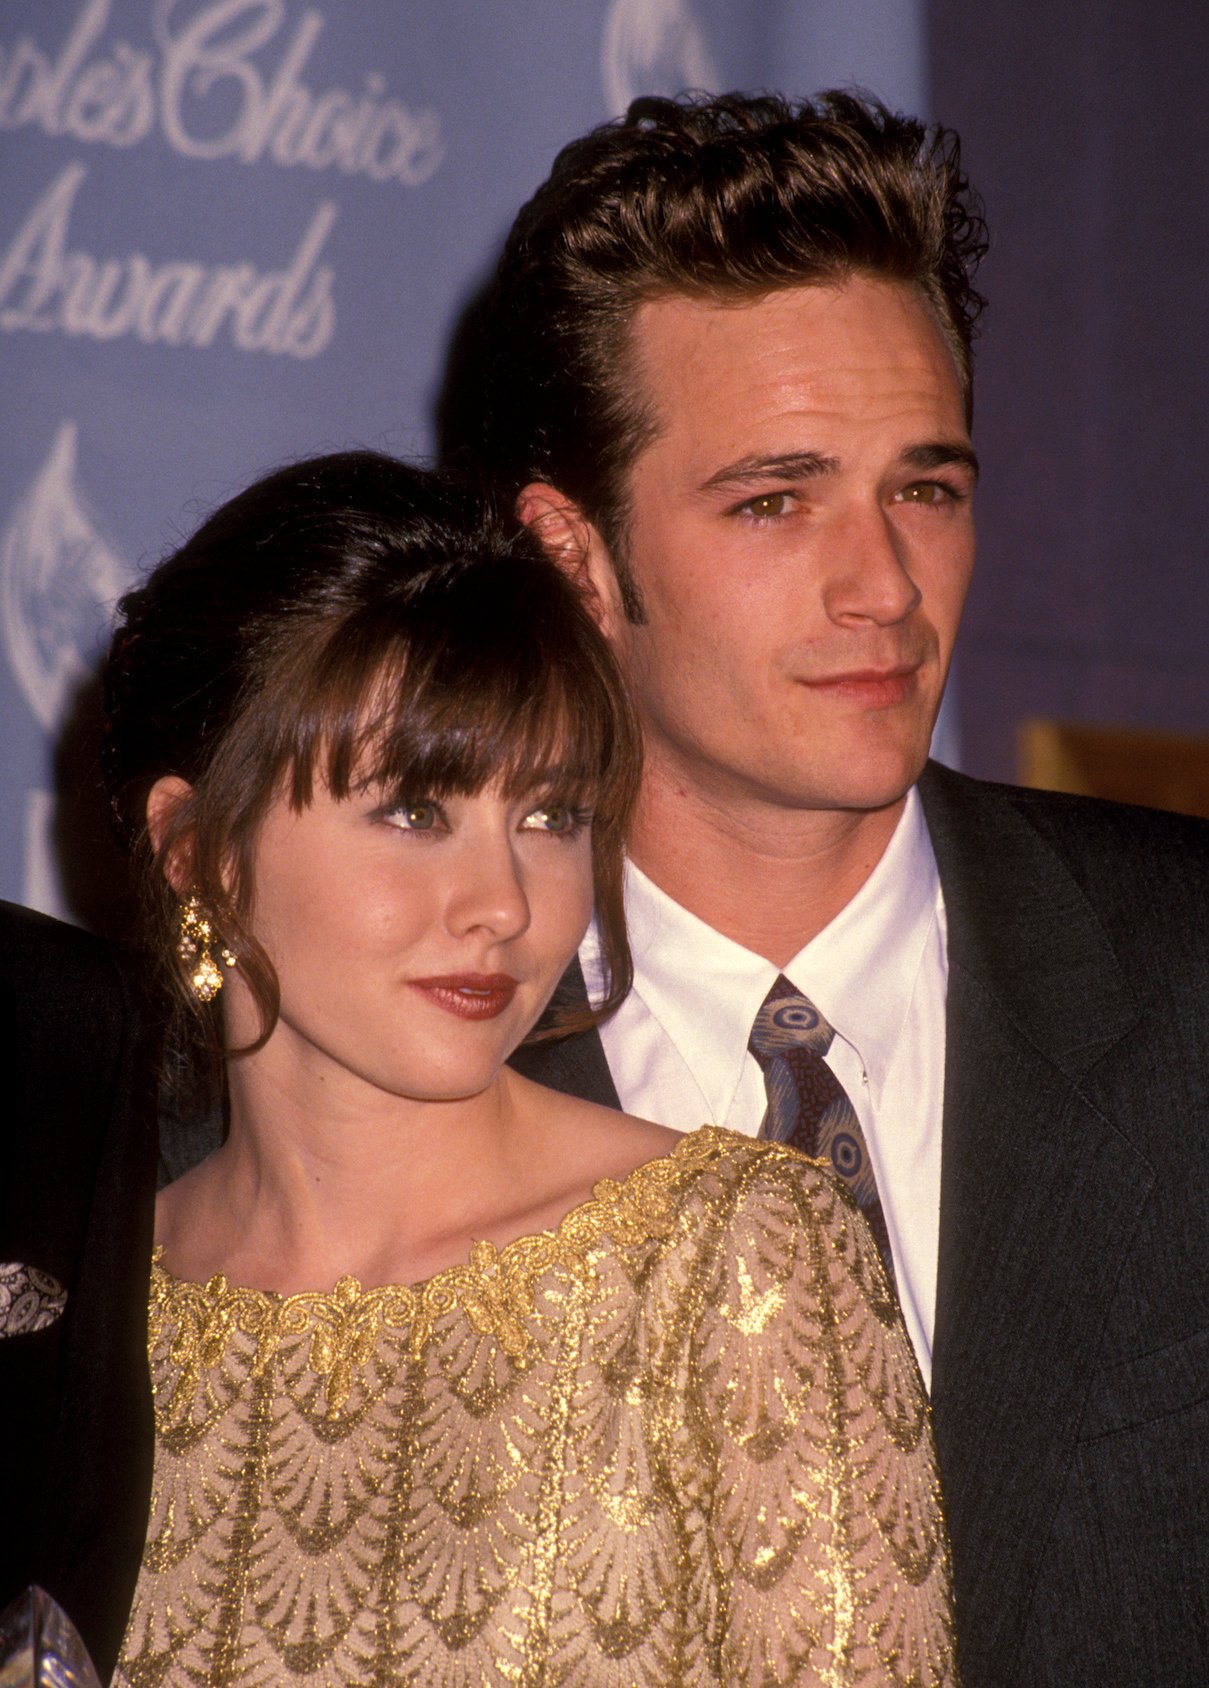 Shannen Doherty and Luke Perry pose together at the 18th Annual People's Choice Awards